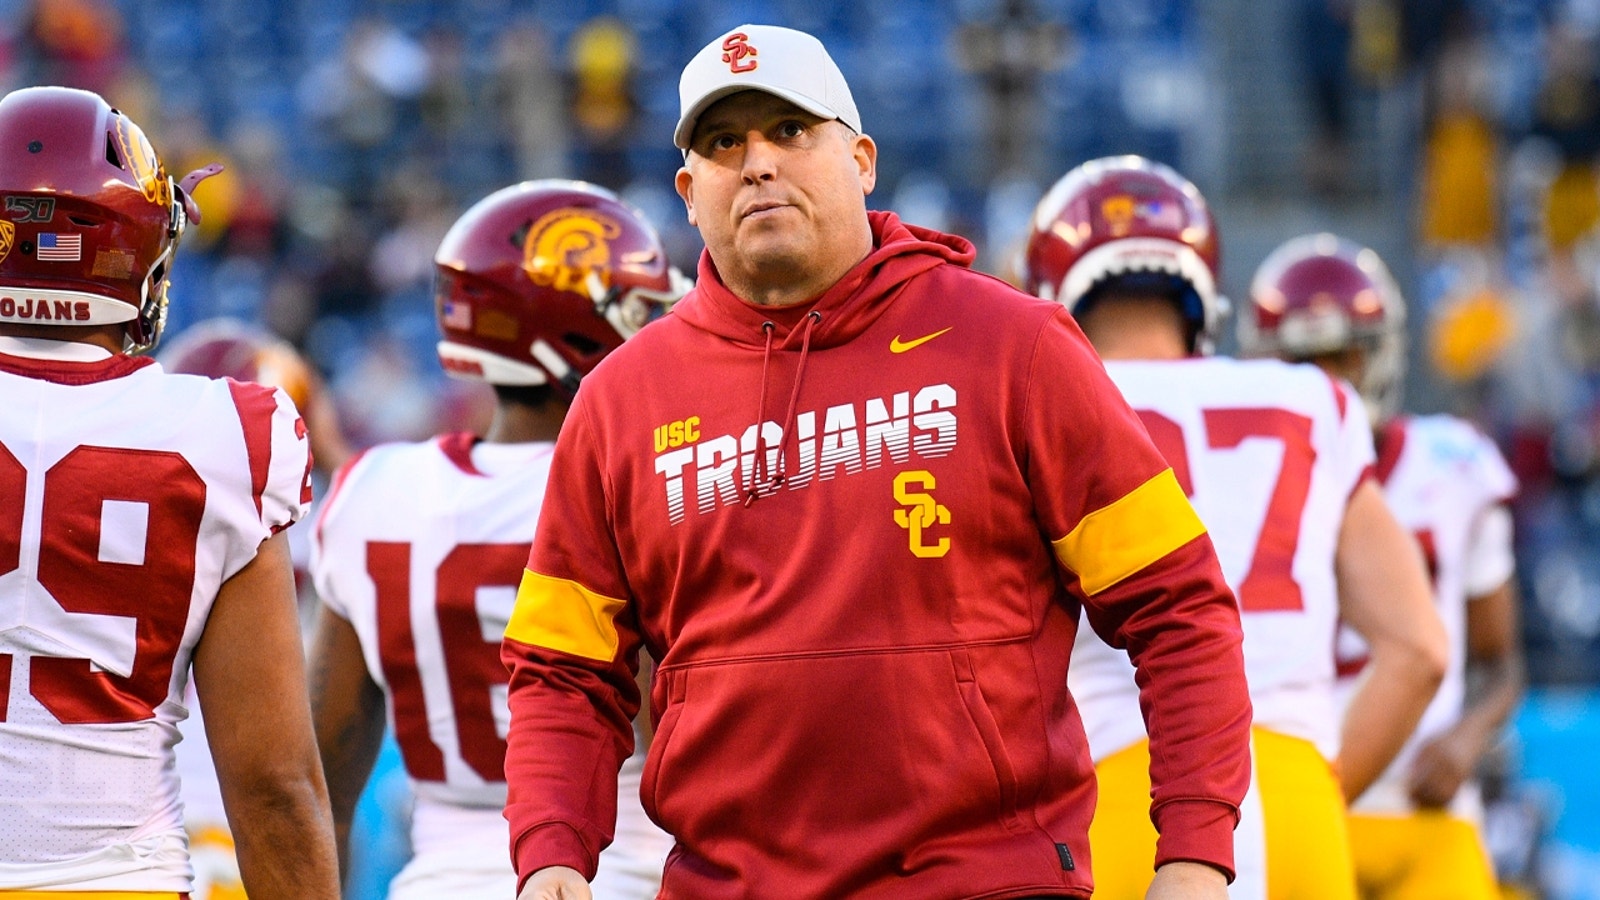 Clay Helton on what needs to happen for a successful spring football season